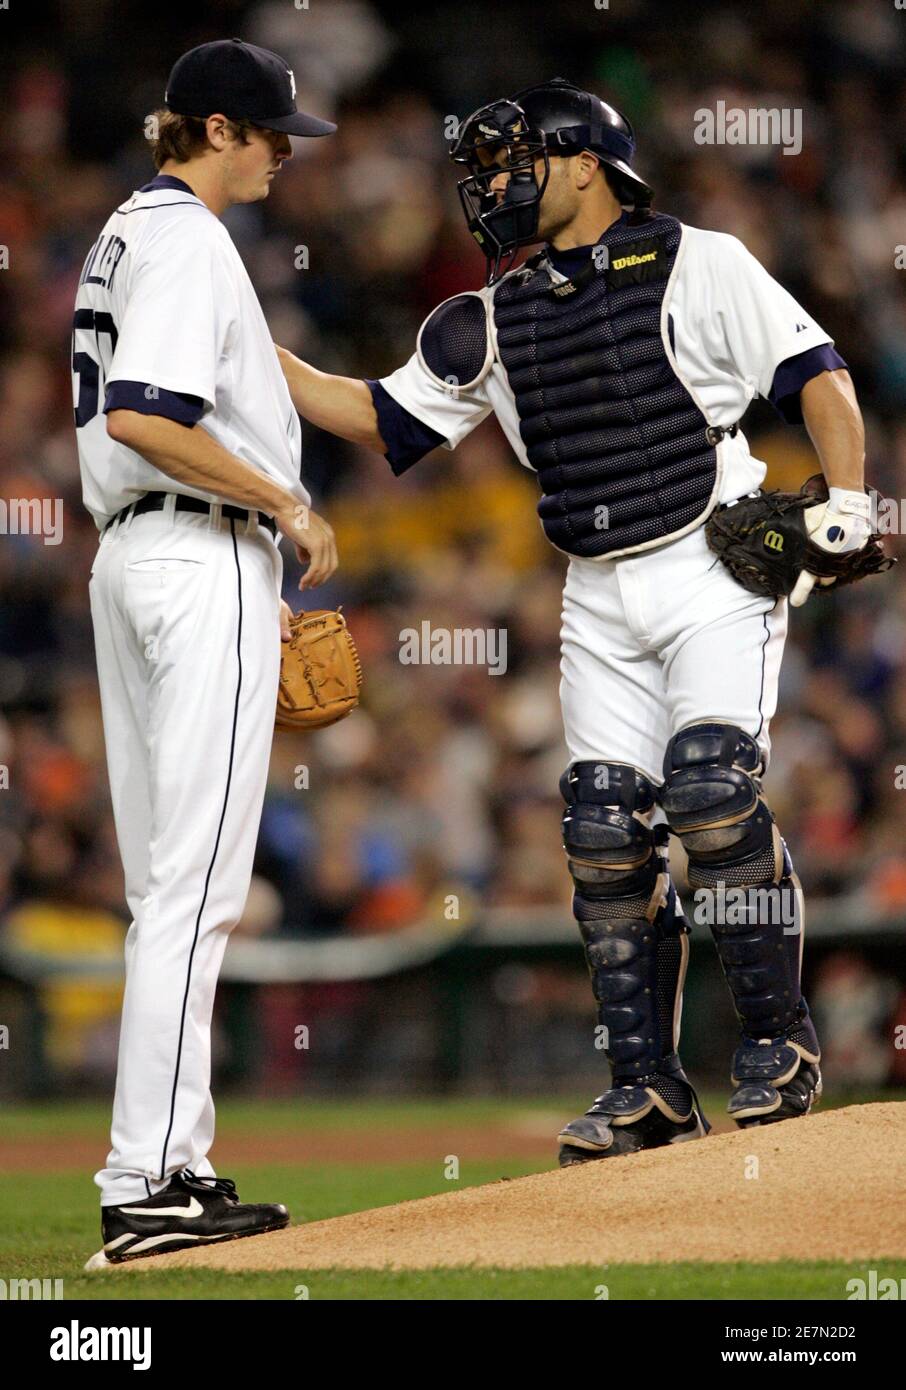 Detroit Tigers catcher Ivan Rodriguez (R) talks with relief pitcher Andrew Miller on the pitching mound during the first inning of their MLB American League Baseball game against the Kansas City Royals in Detroit, Michigan September 30, 2006.  REUTERS/Rebecca Cook  (UNITED STATES) Stock Photo